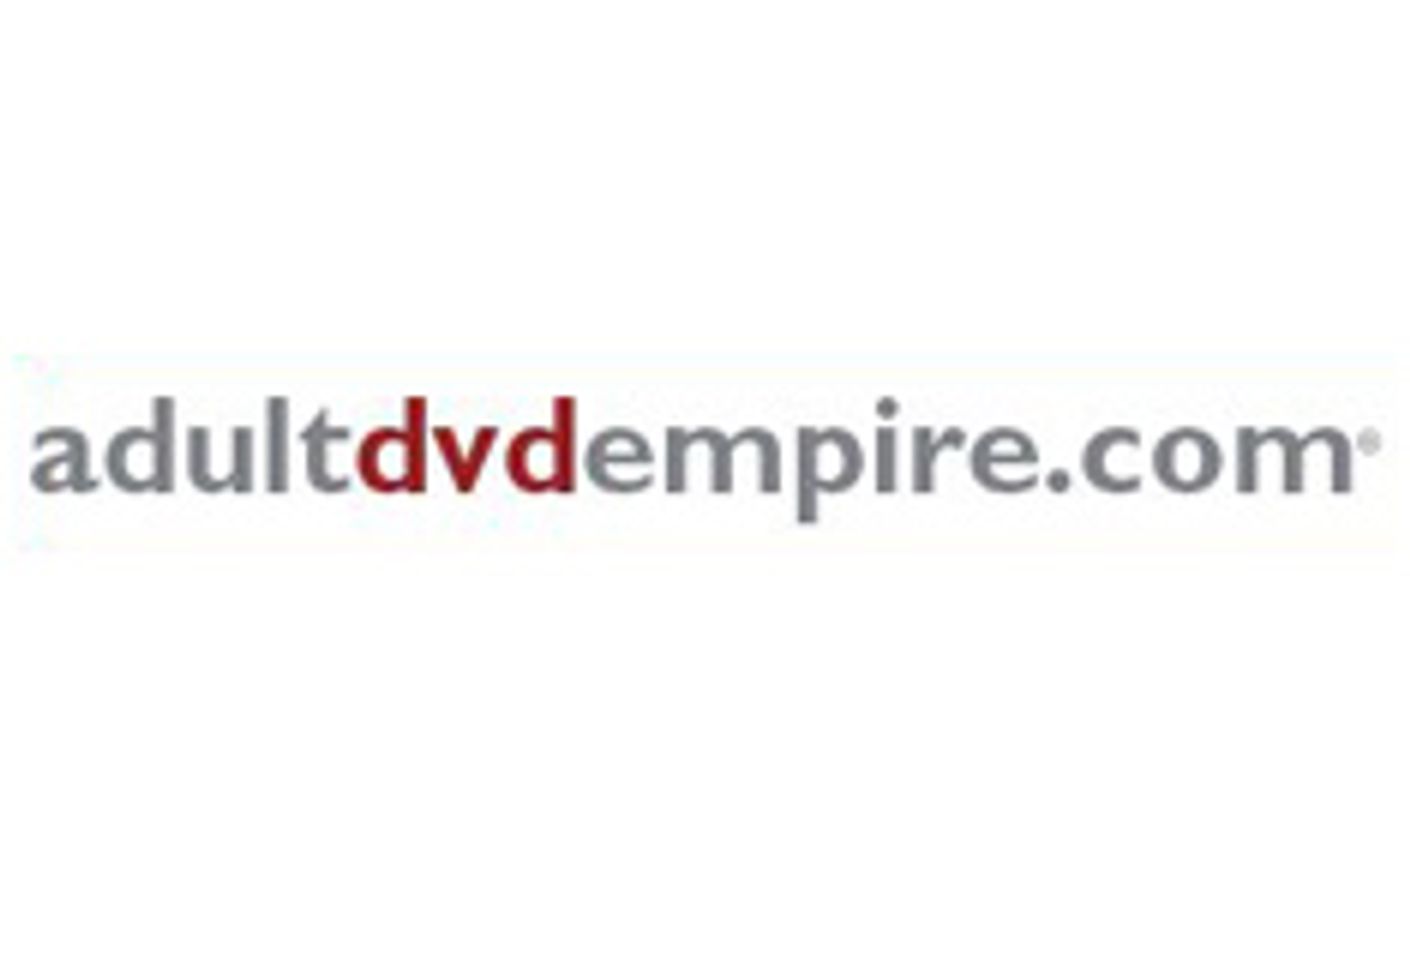 Adult DVD Empire Announces Top Searches of 2010